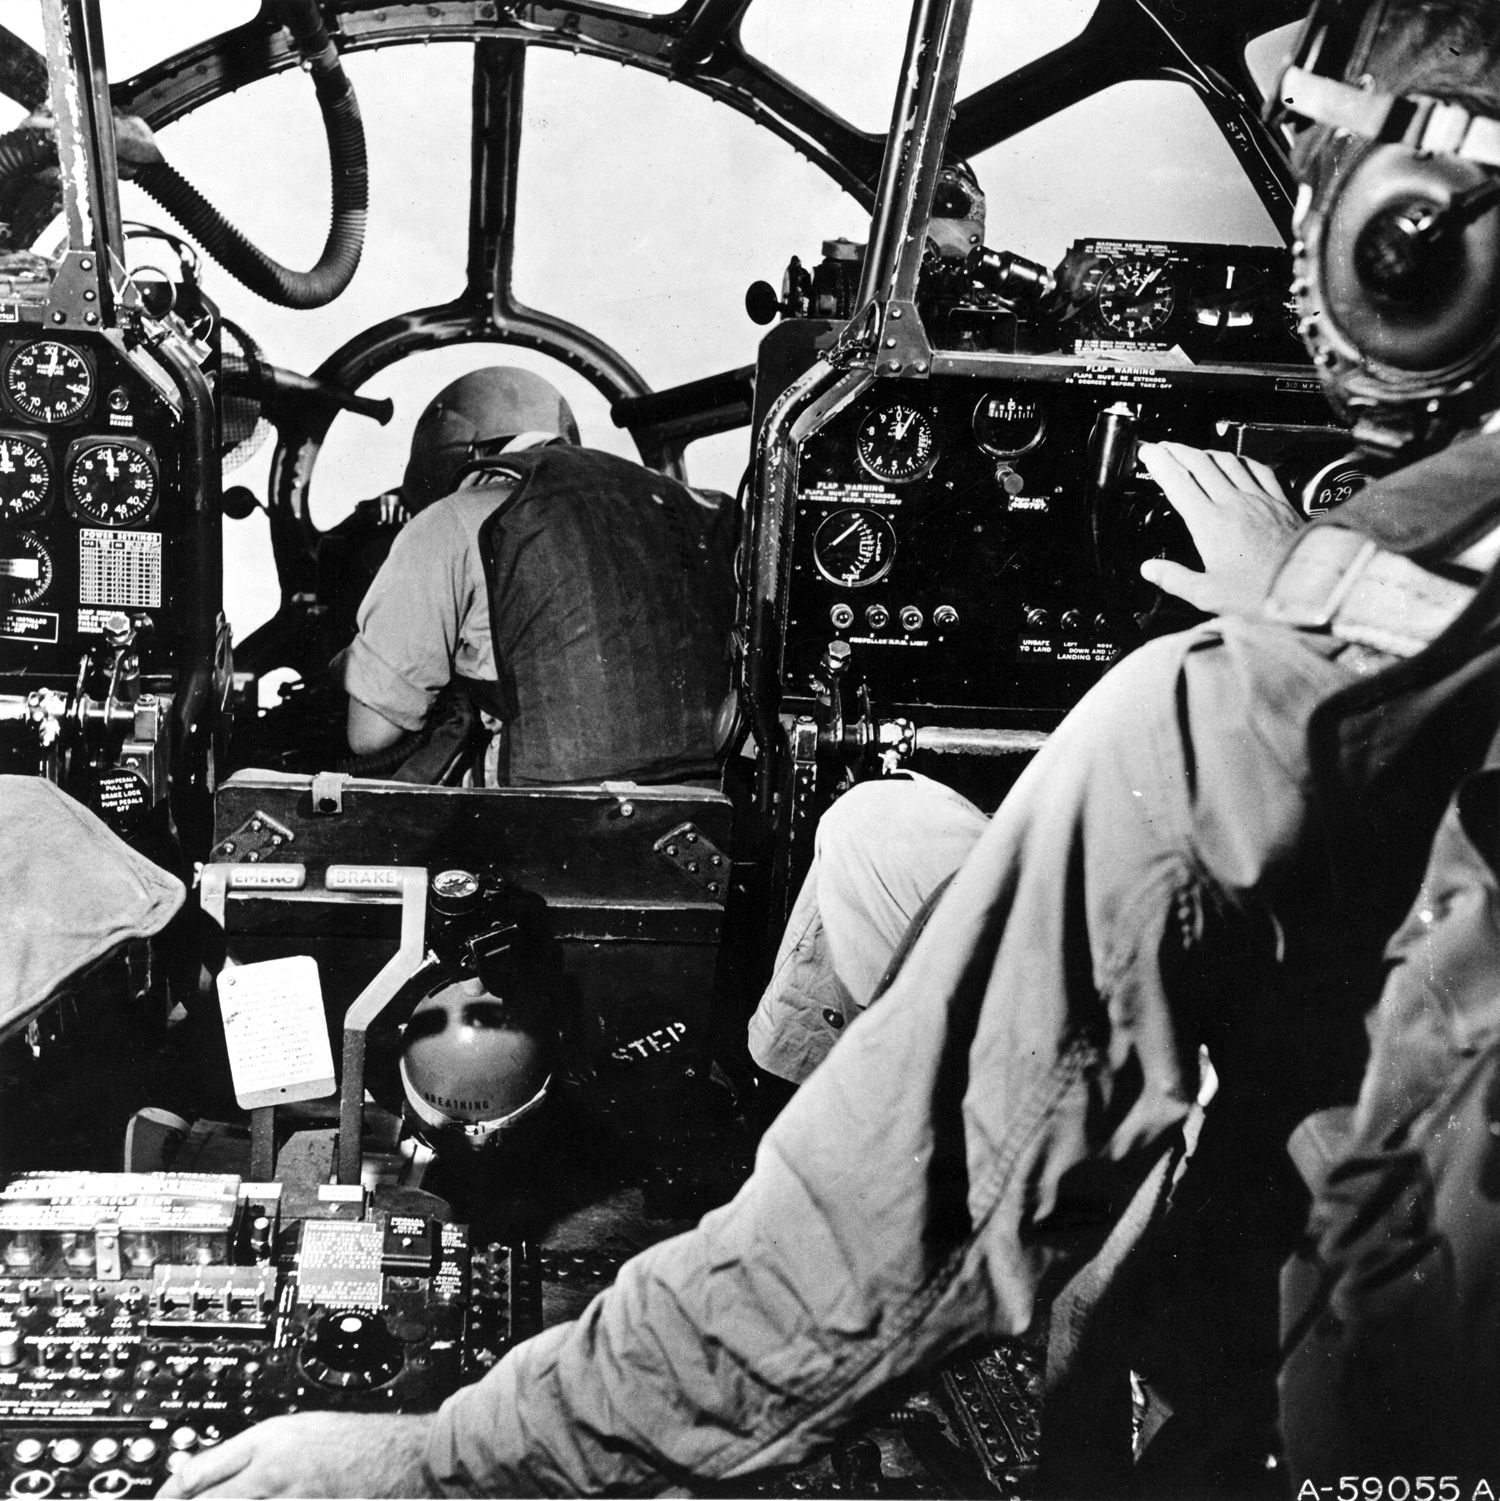 In the initial stage of a bombing run, the pilot of a B-29 Superfortress bomber switches to autopilot. The bombardier, meanwhile, zeroes in on the target 20,000 feet below.